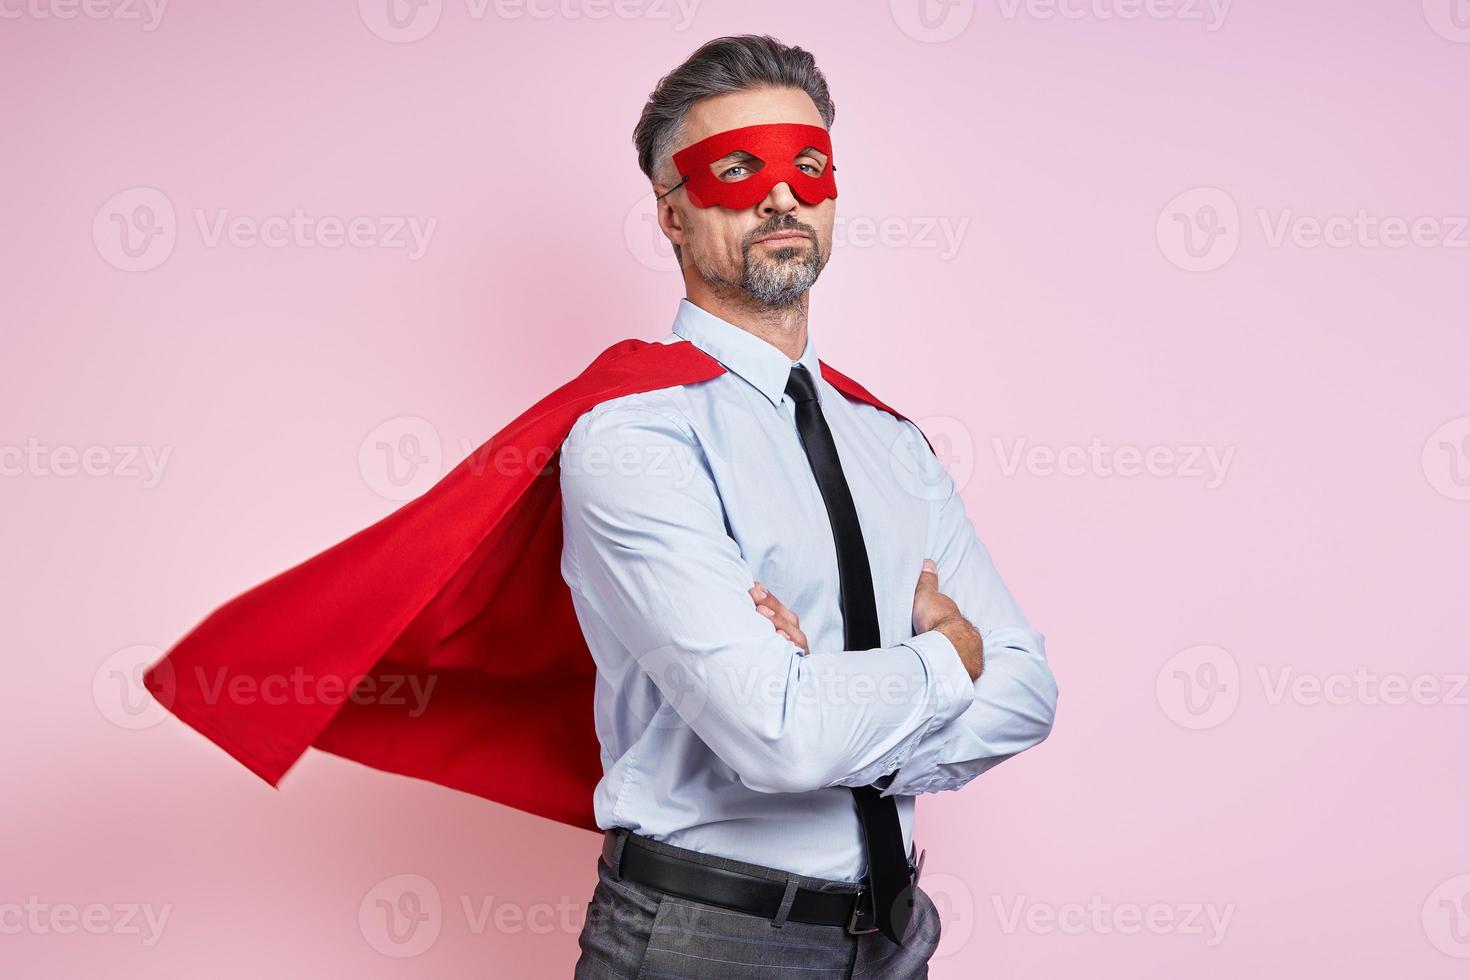 Confident man in shirt and tie wearing superhero cape and keeping arms crossed against pink background photo